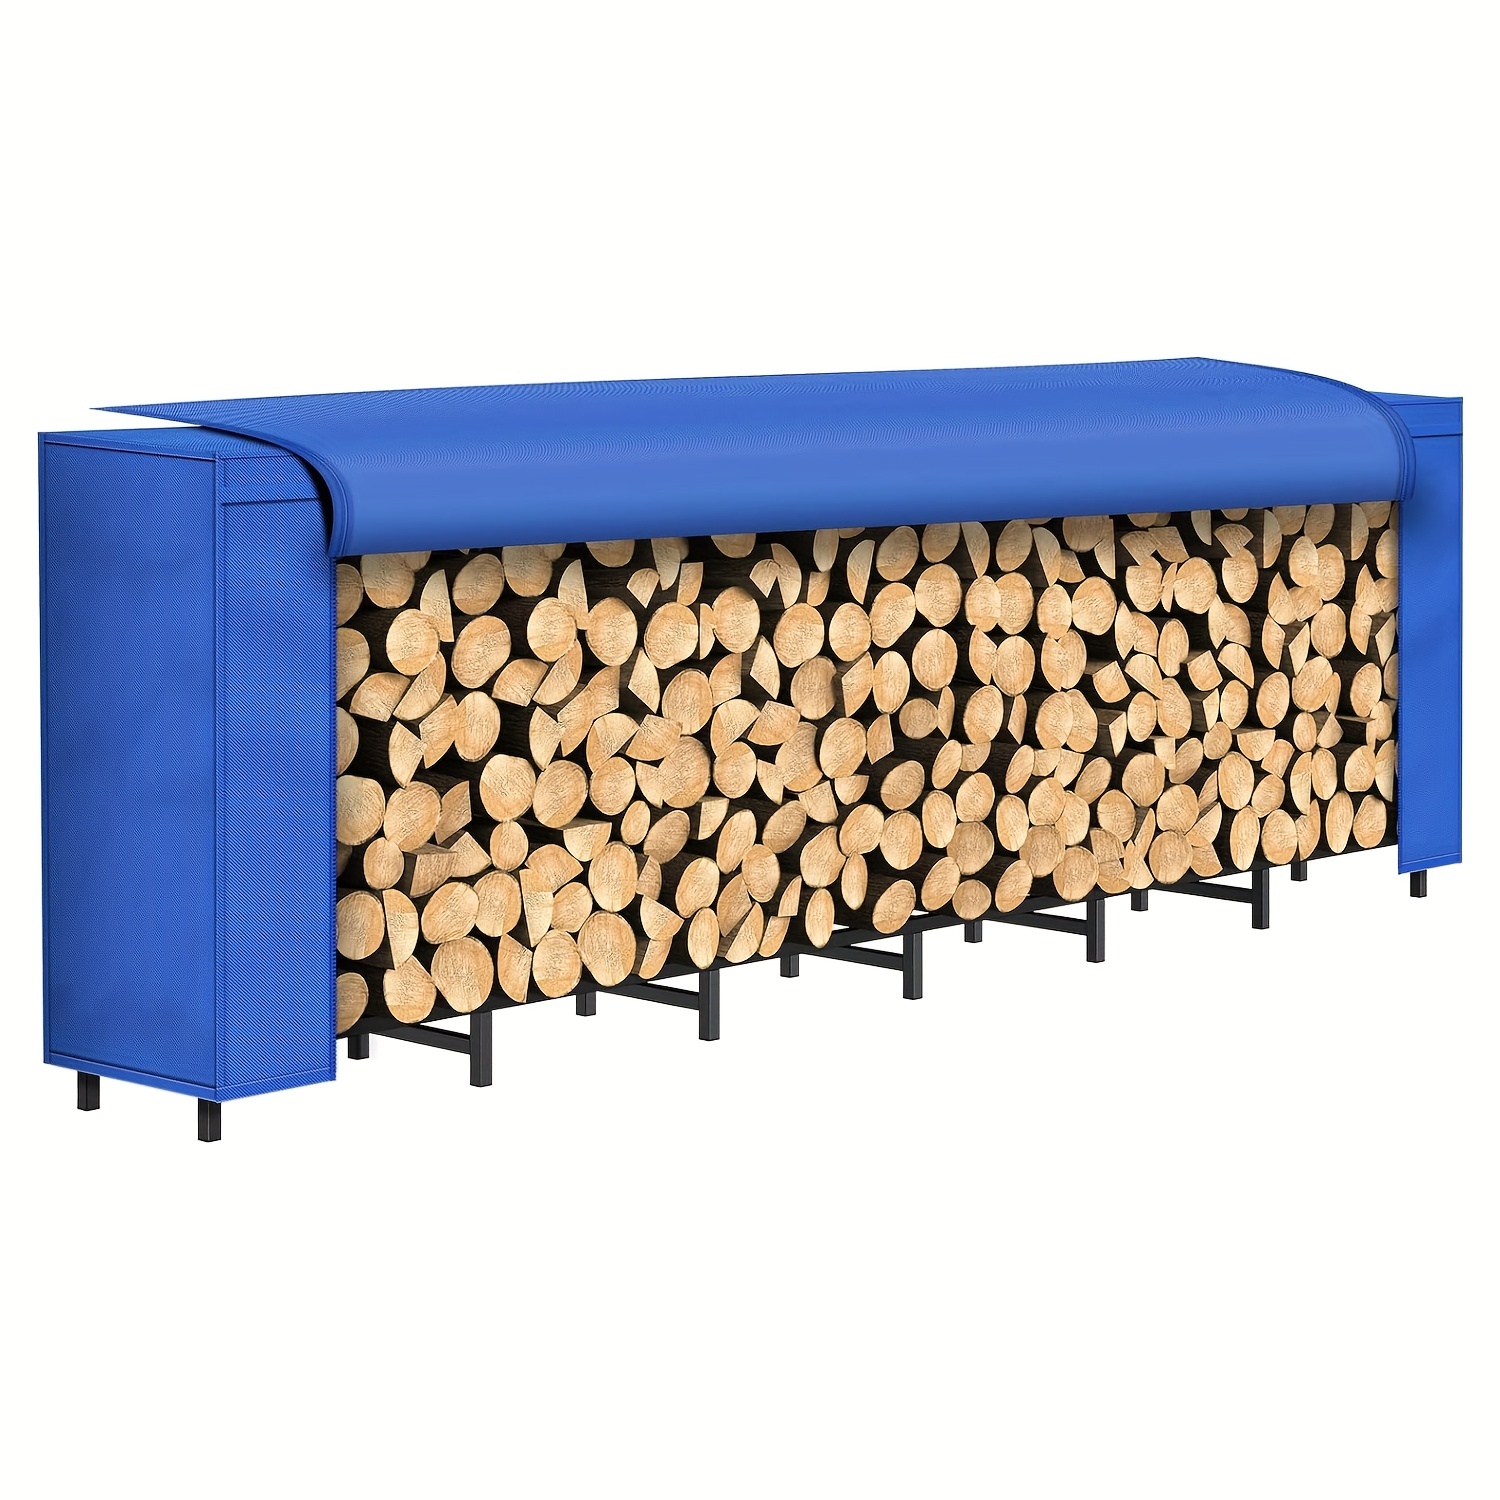 

8ft Firewood Rack Outdoor With Cover Combo Set Waterproof For Wood Storage, Adjustable Fire Log Stacker Stand, Heavy Duty Holder For Fireplace Metal Lumber, Blue